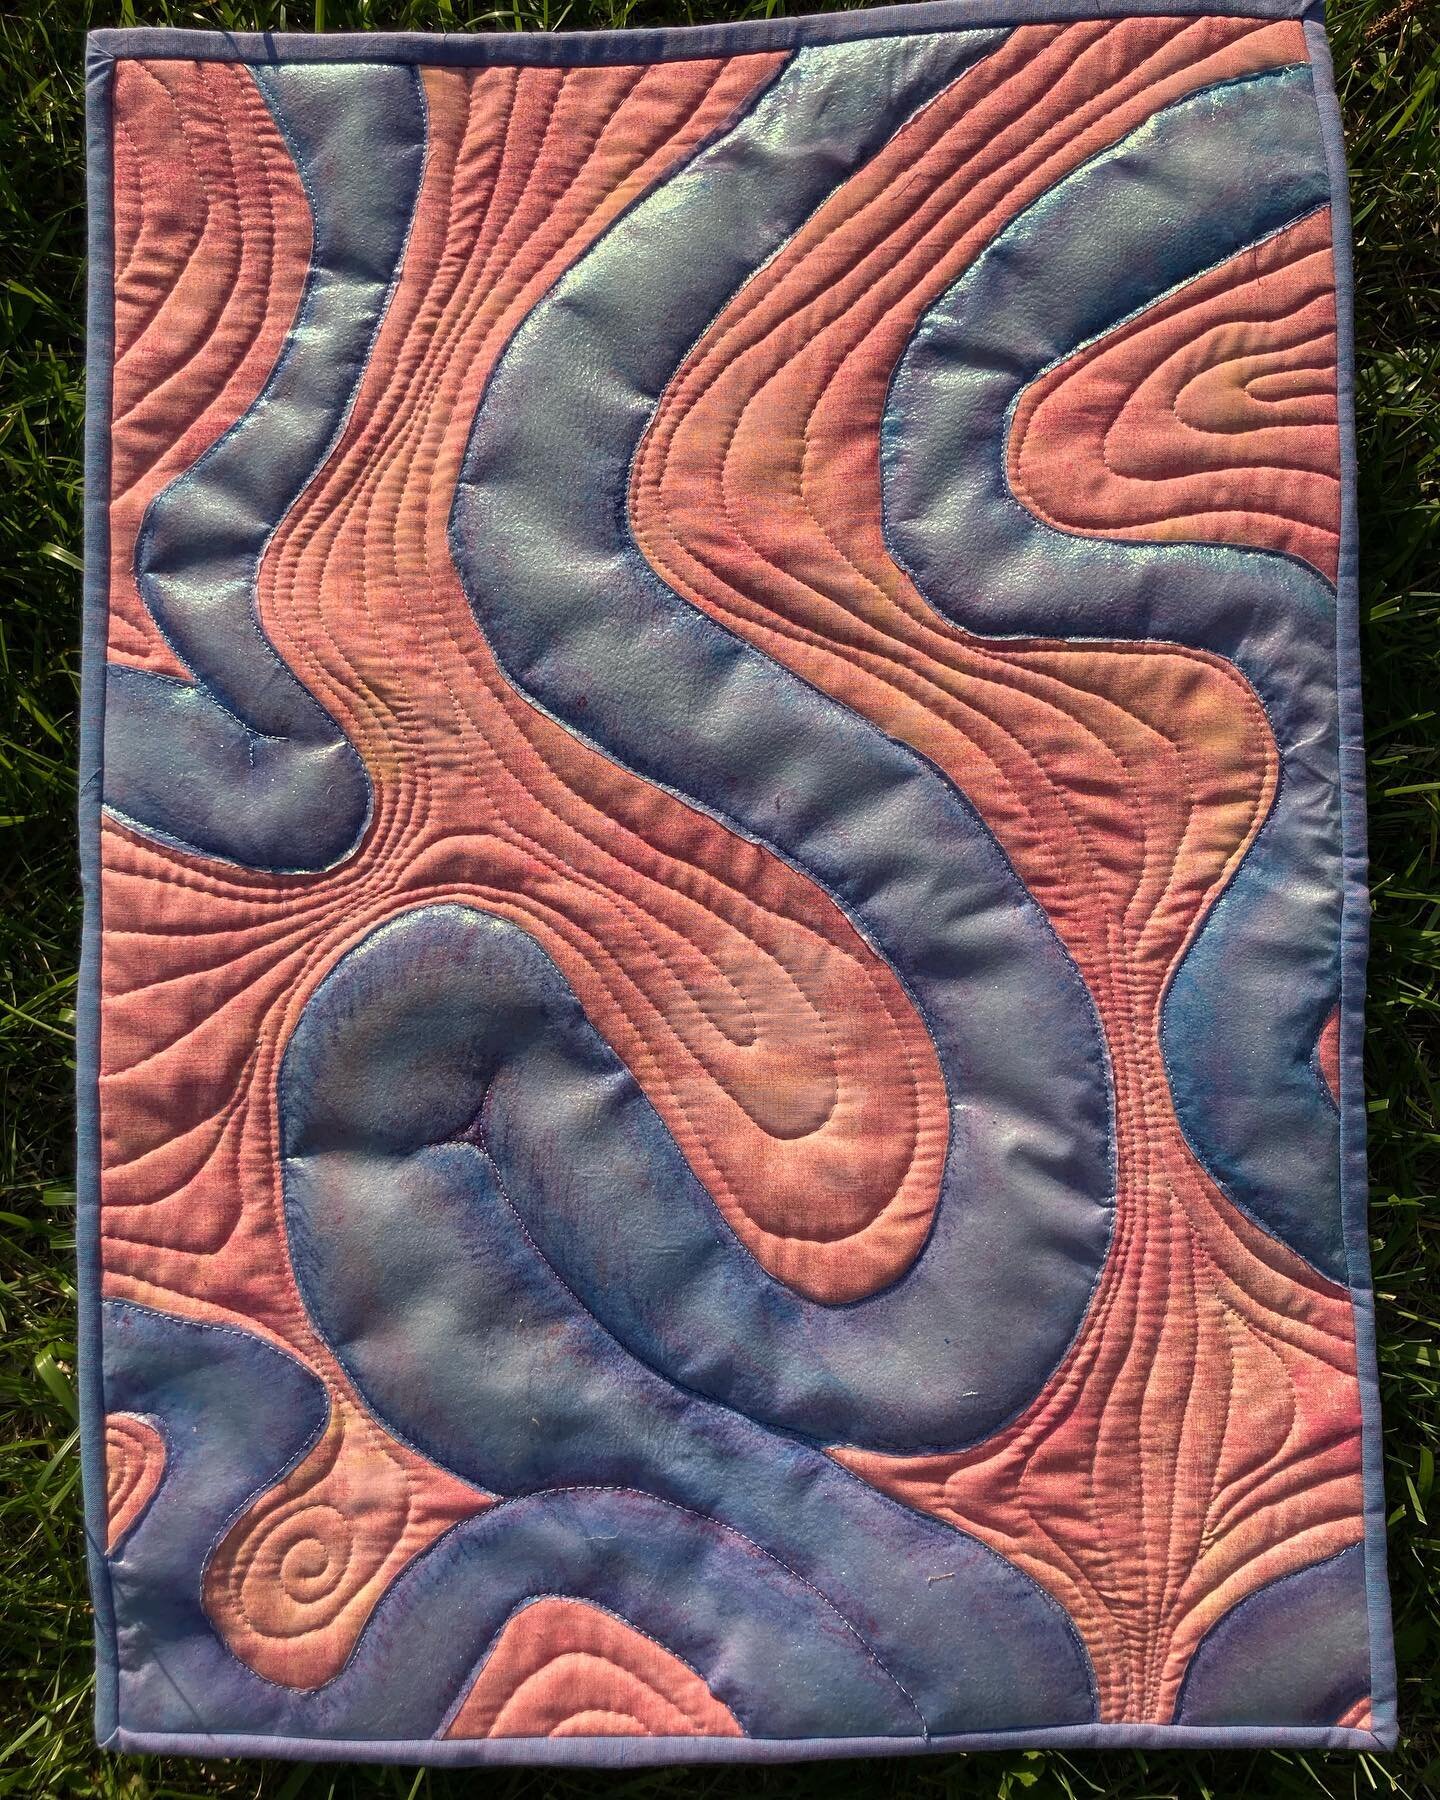 Small Intestine quilt: Assimilation, a flow of nutrients across membranes, the currents of the meandering stream, the gurgling brook, the sliding tube #anatomyart #artquilt #bodymindcentering #embodiedanatomy #thebodyminddance #somaticmovementeducati